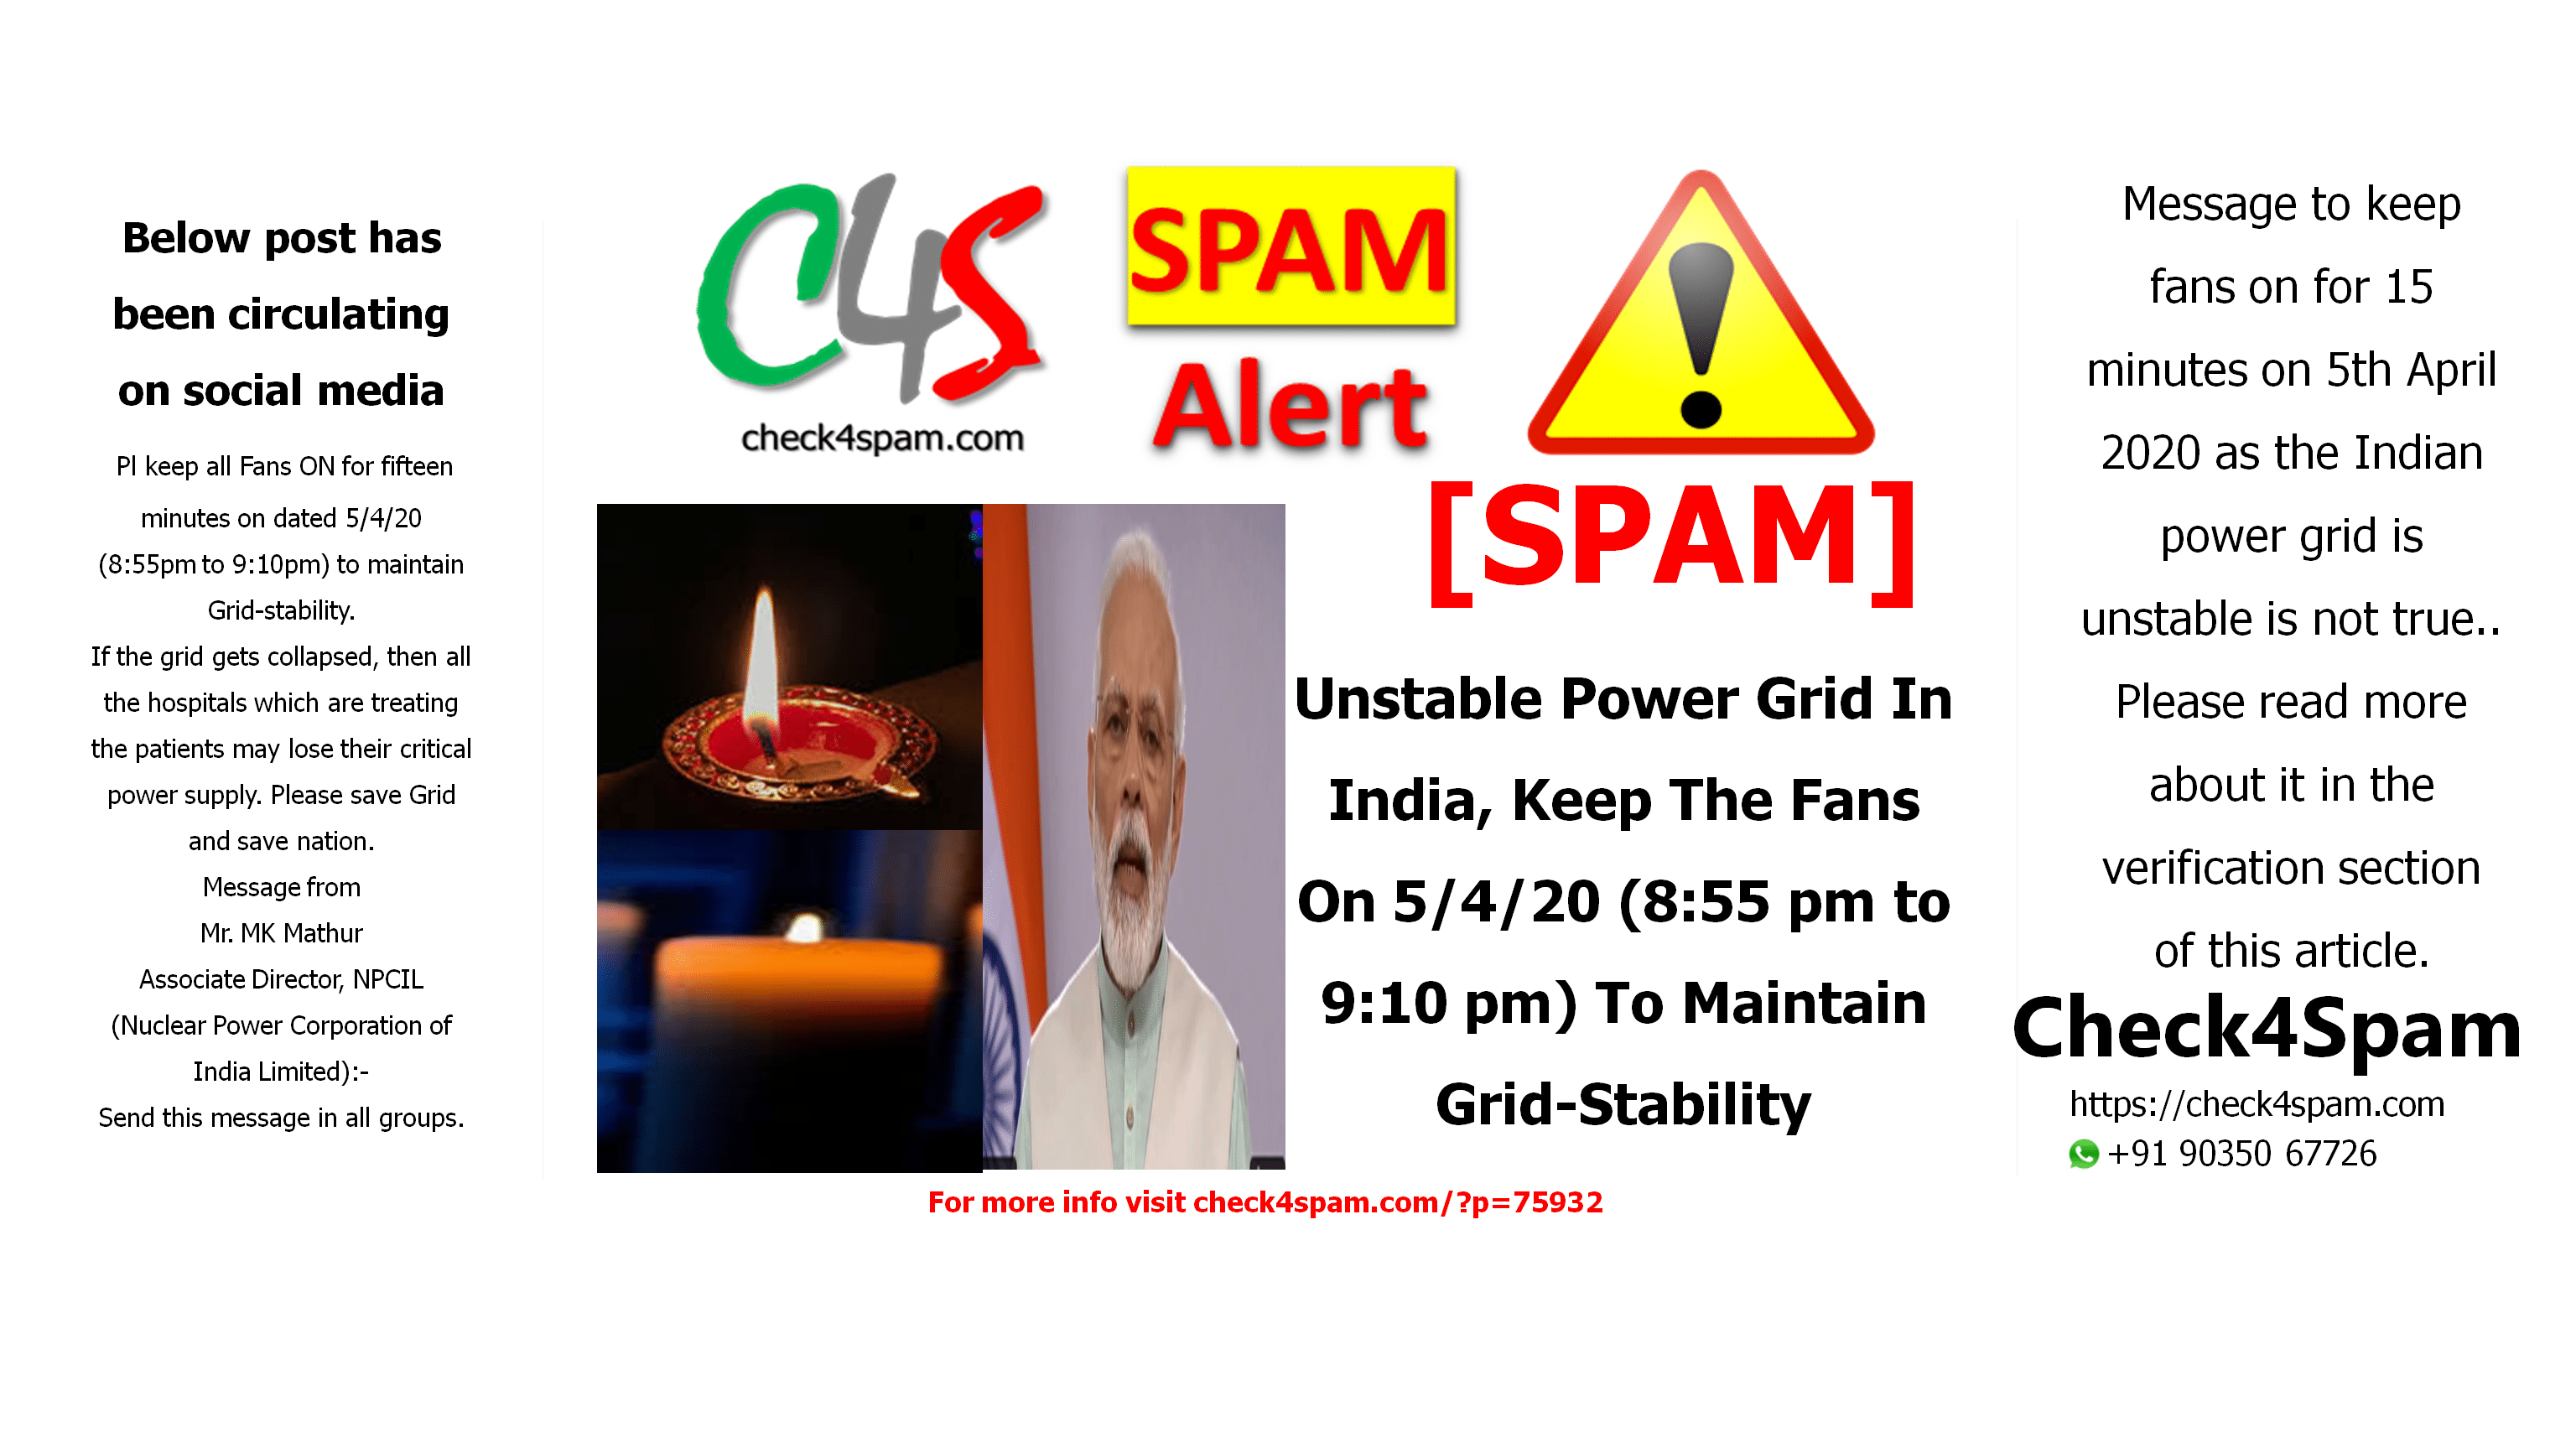 Unstable Power Grid In India, Keep The Fans On 5/4/20 (8:55 pm to 9:10 pm) To Maintain Grid-Stability